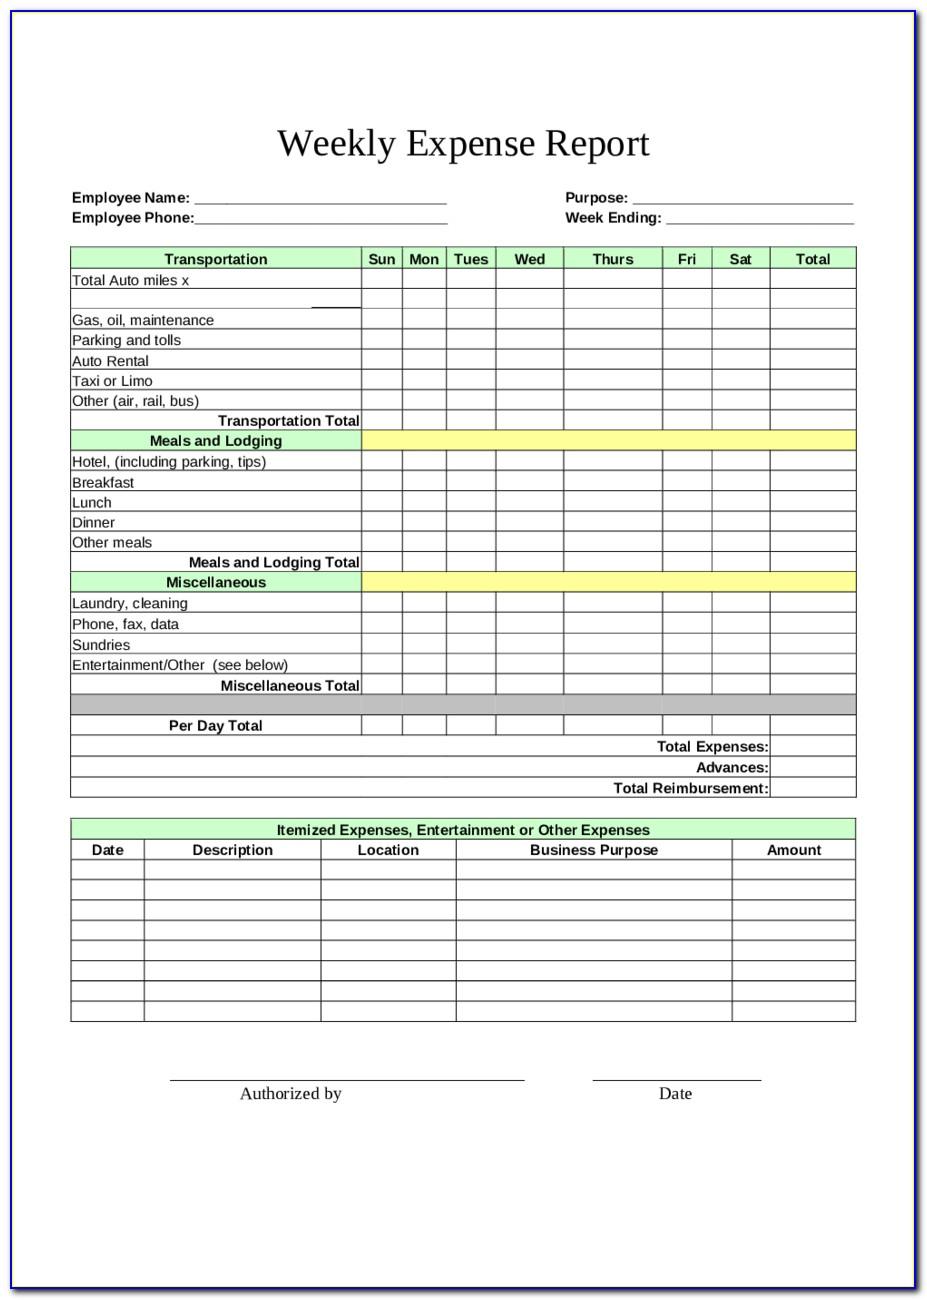 Ms Excel Database Templates